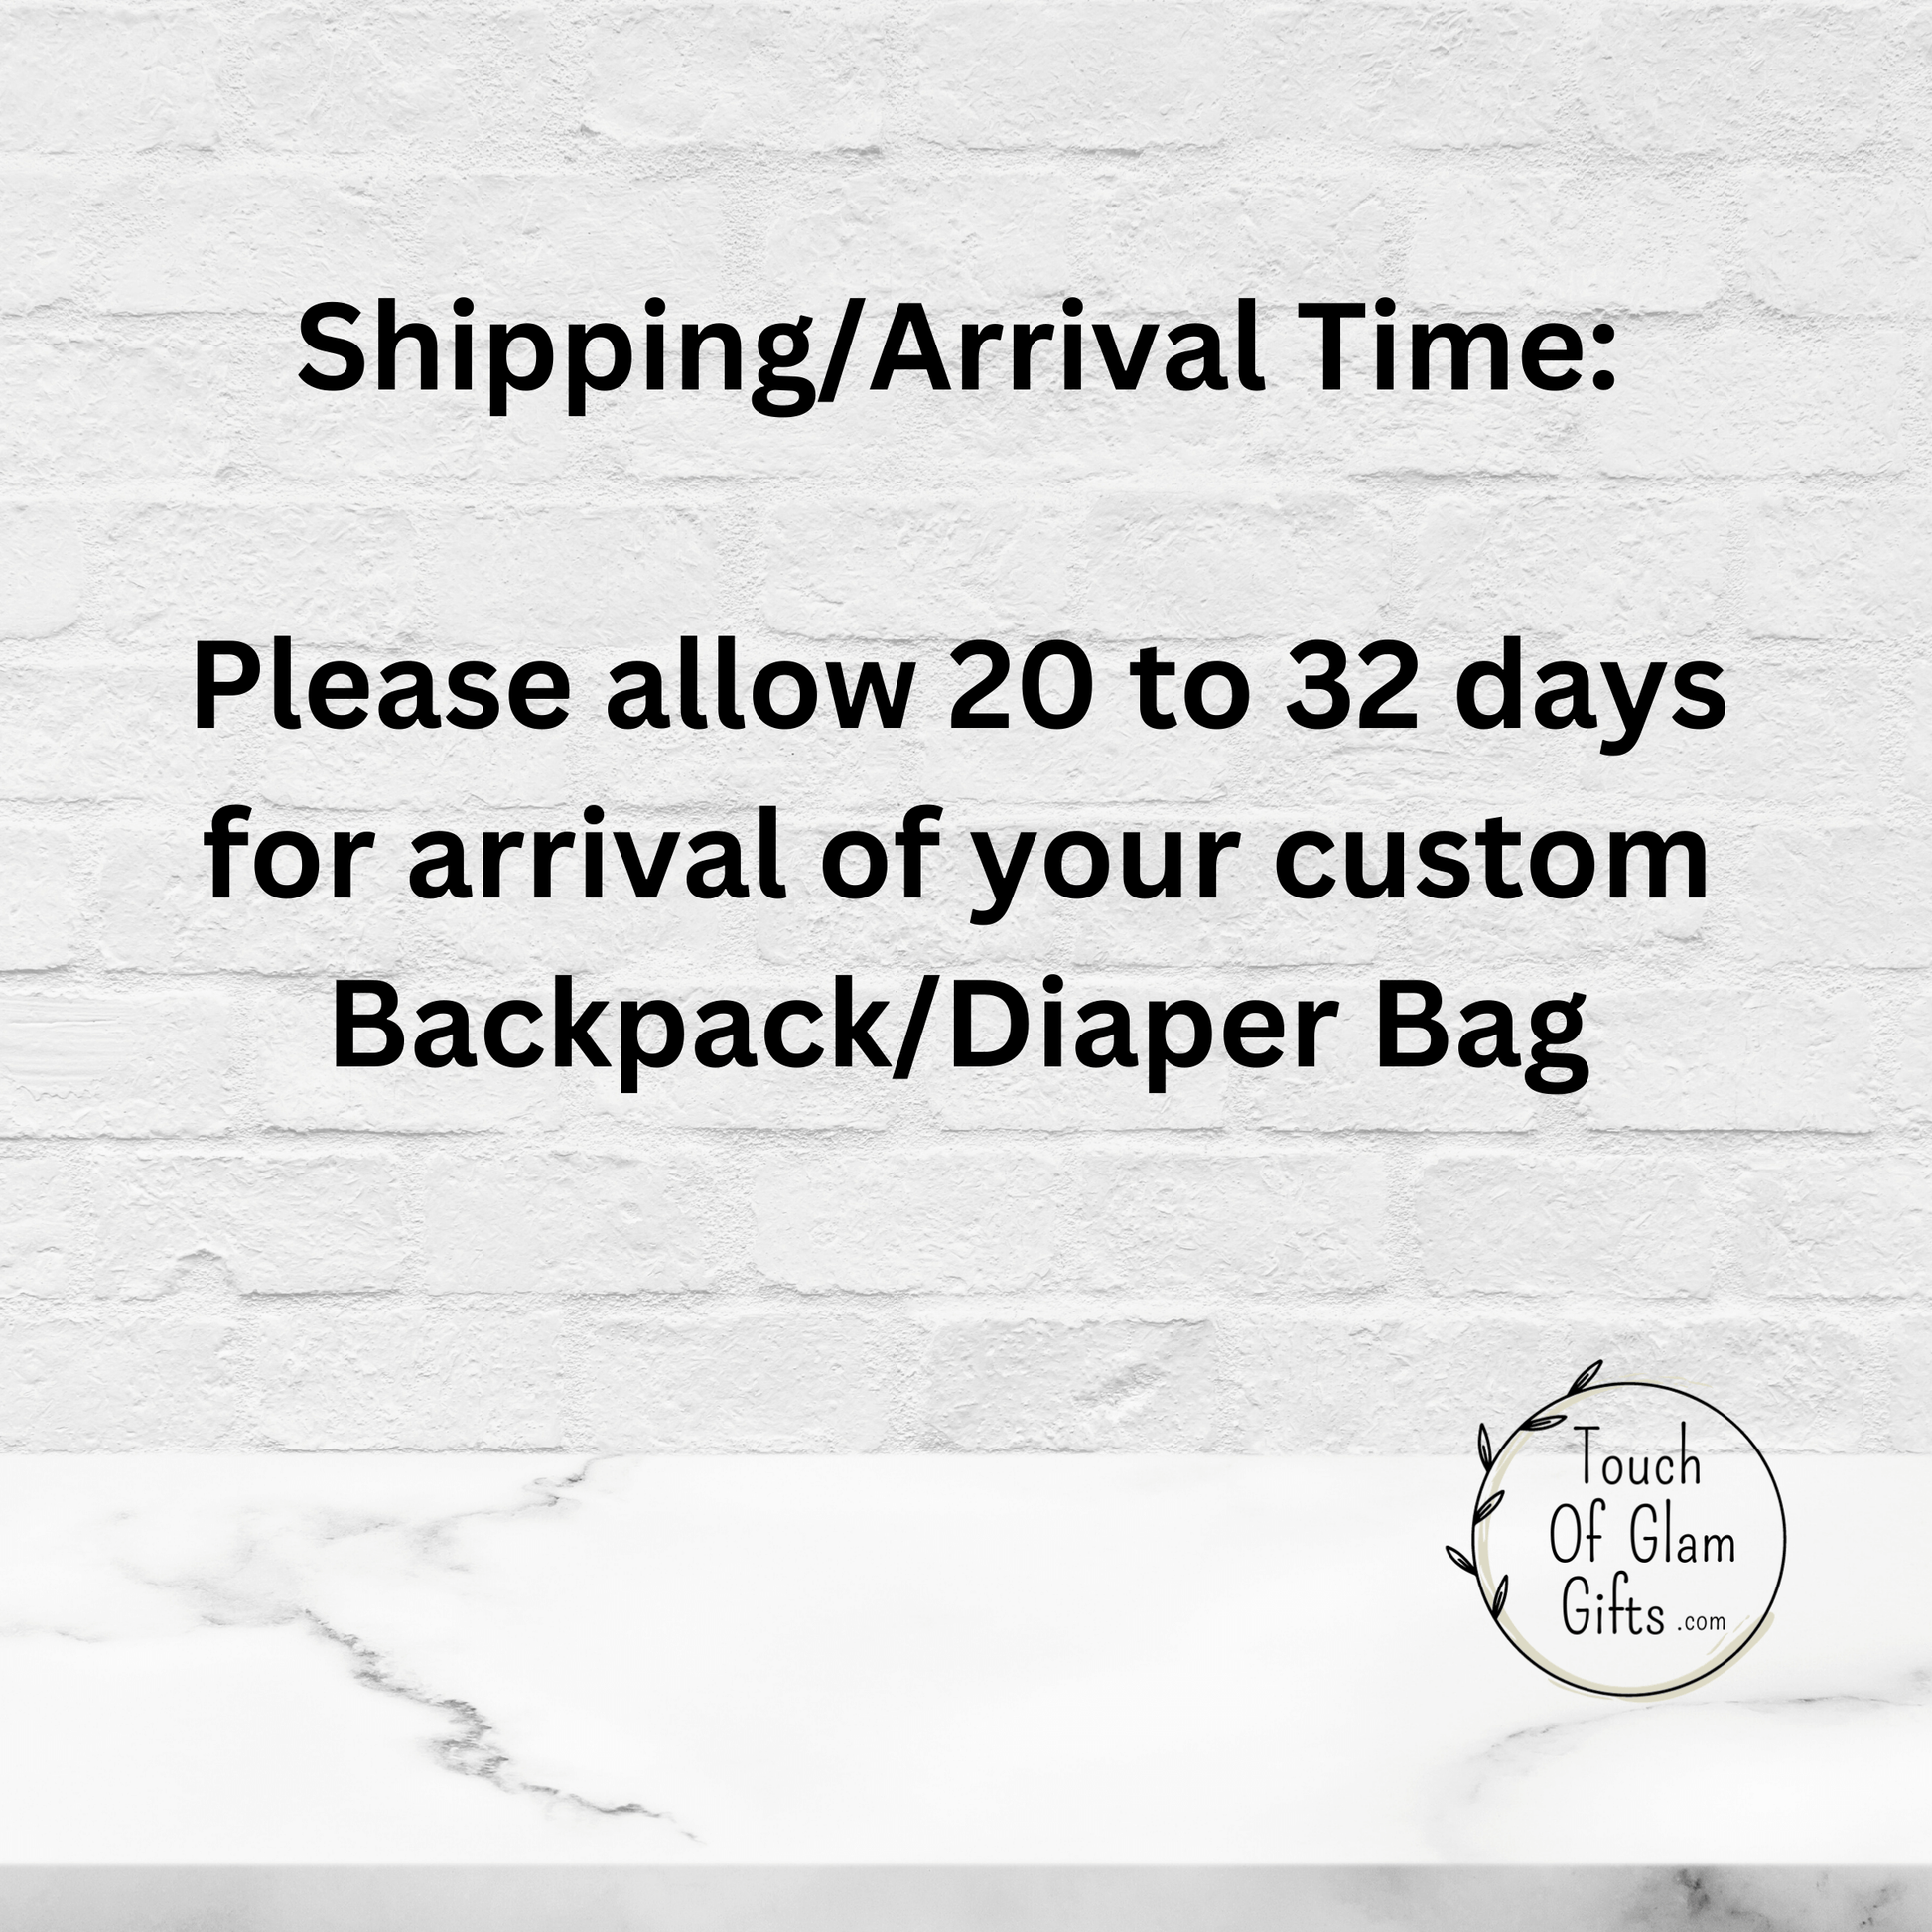 Shipping arrival time for your custom cowhide print backpack purse is twenty to thirty two days.